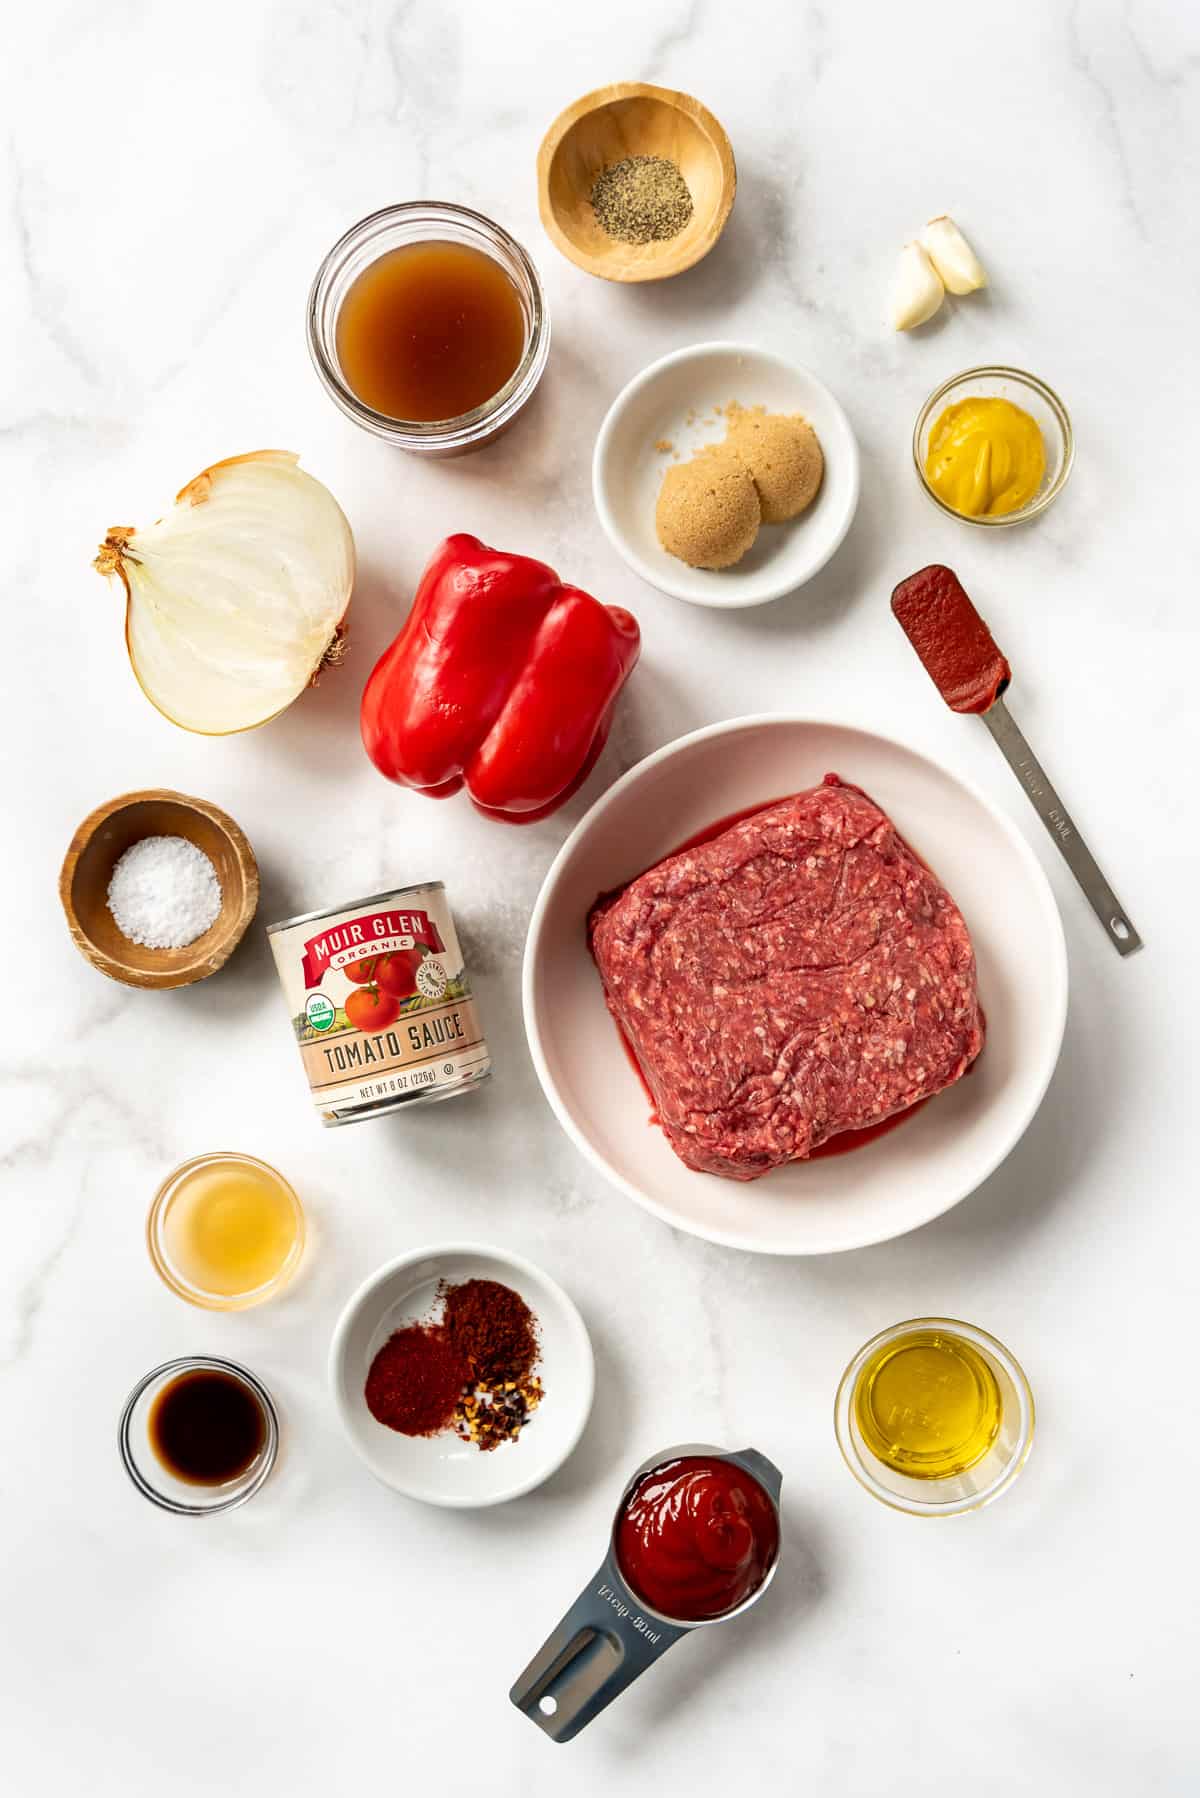 Ingredients for making homemade sloppy joes from scratch with the best sloppy joe sauce.